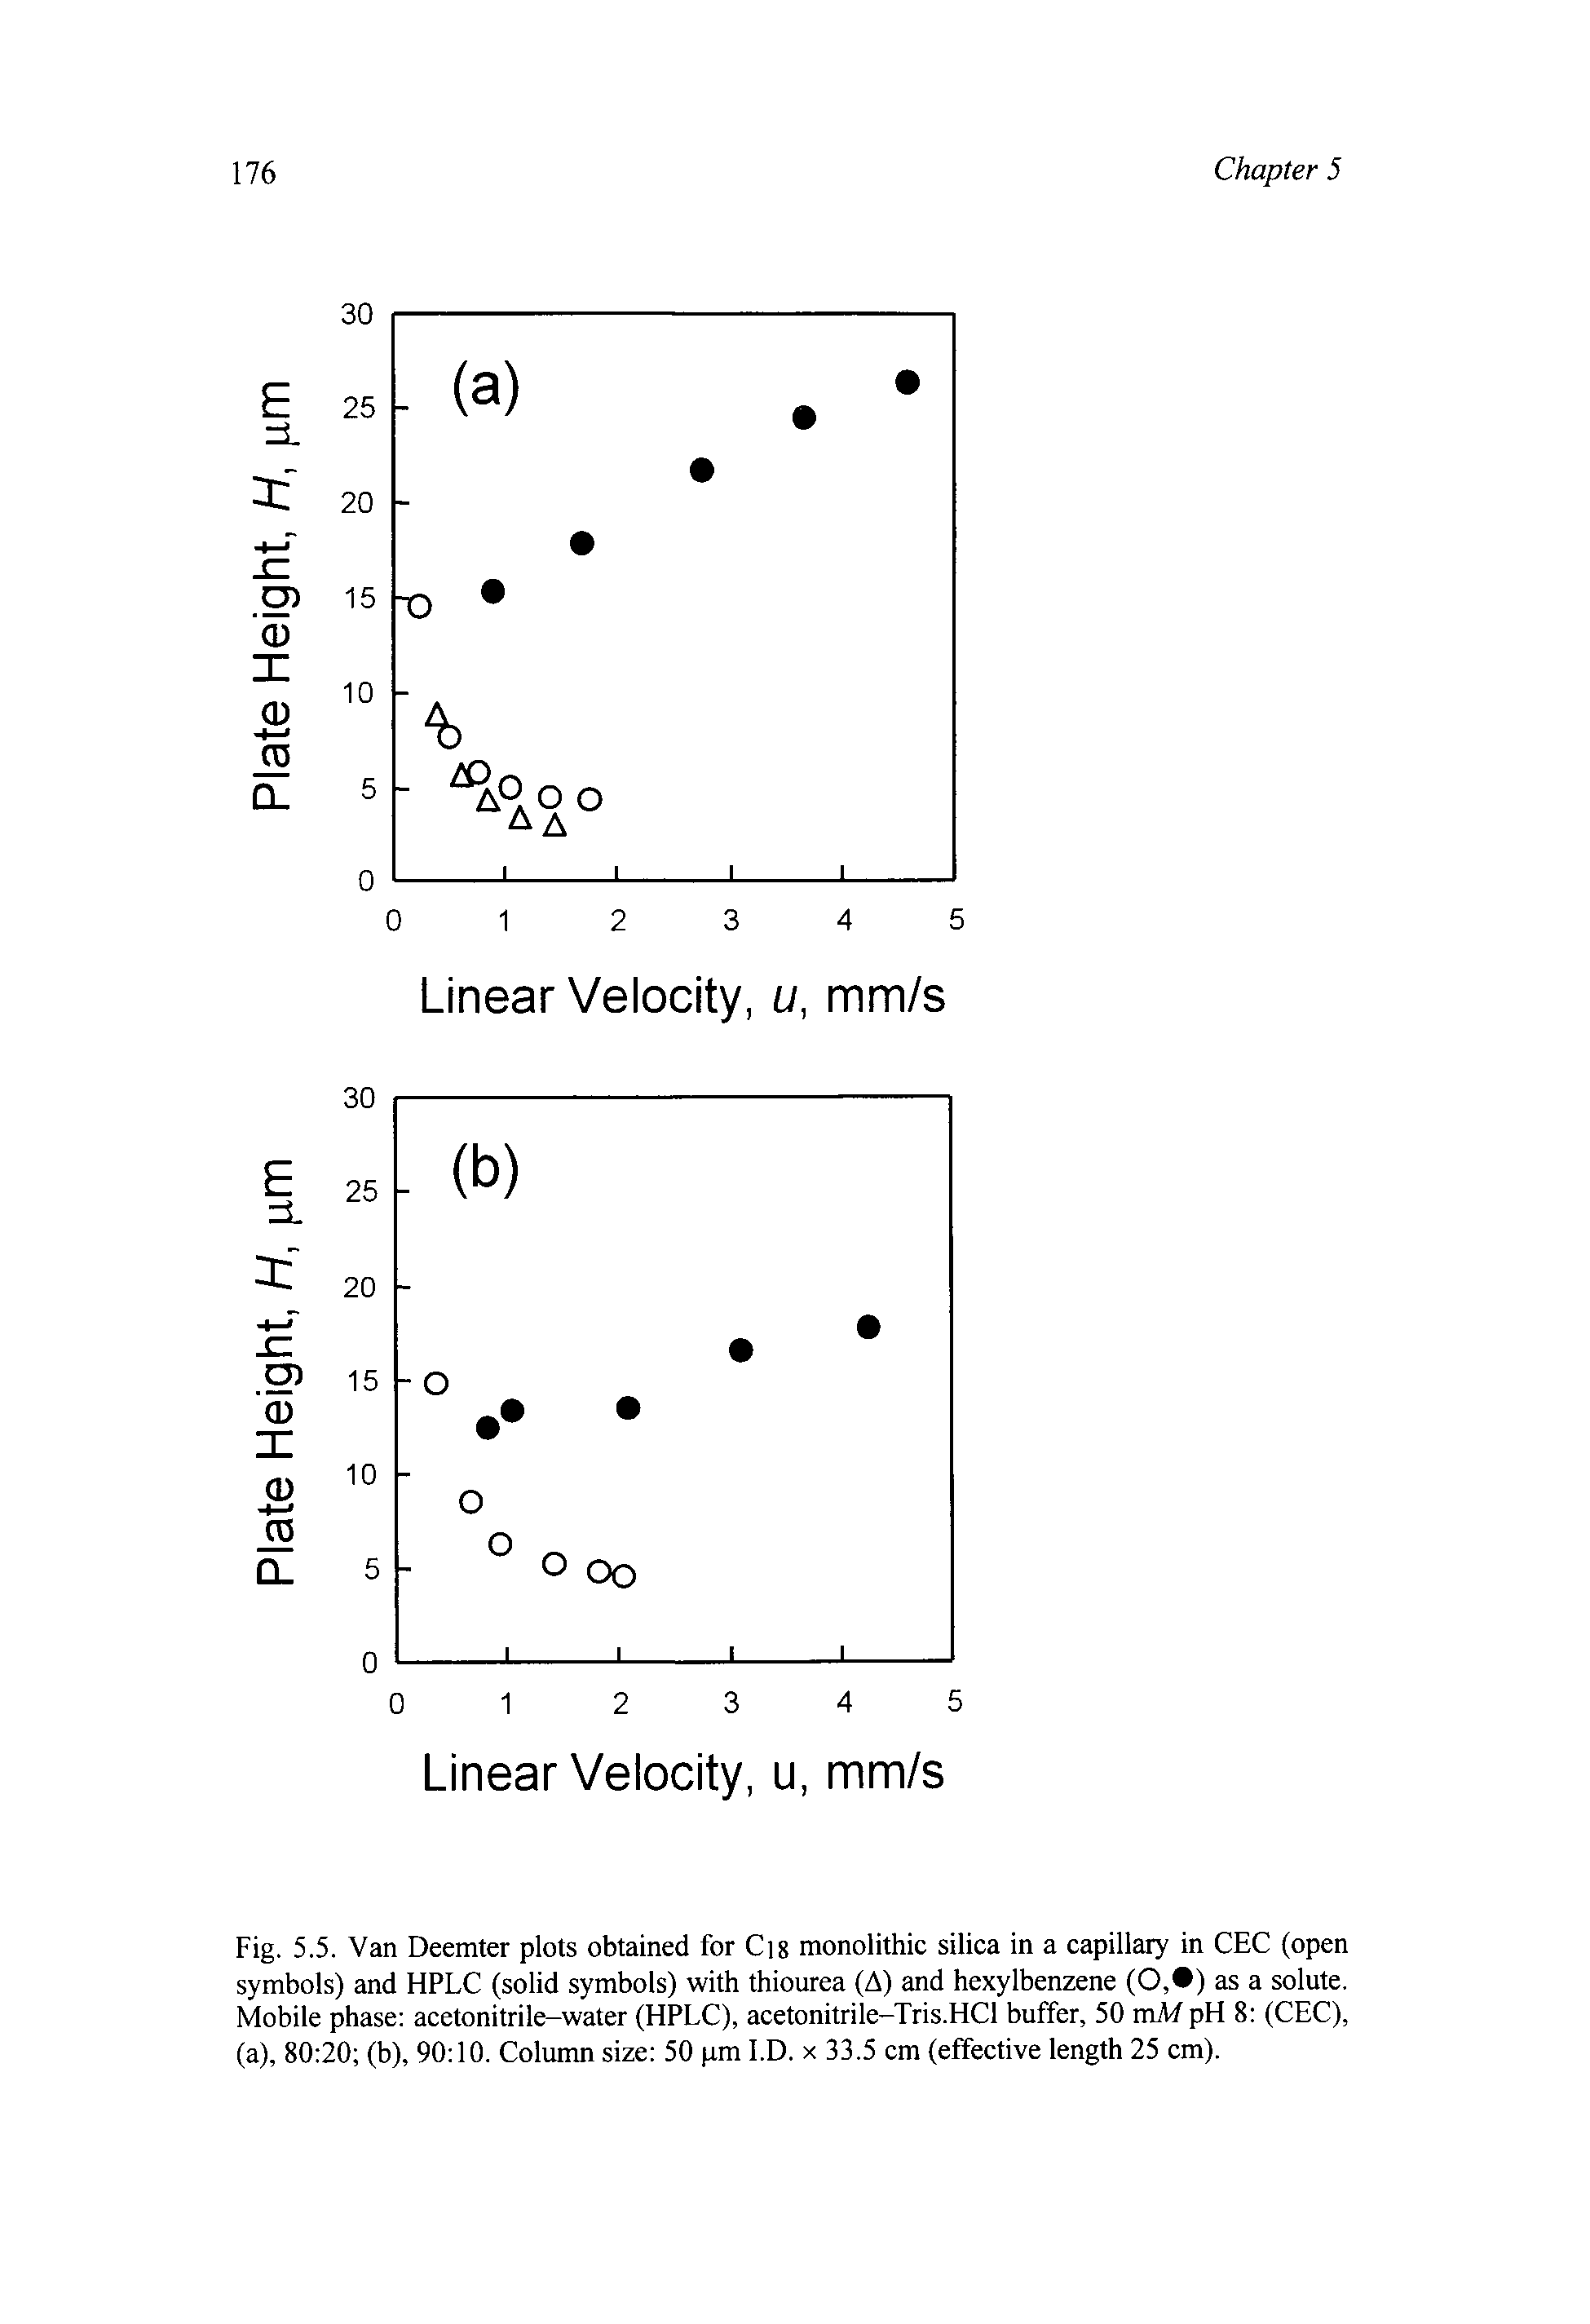 Fig. 5.5. Van Deemter plots obtained for Cib monolithic silica in a capillary in CEC (open symbols) and HPLC (solid symbols) with thiourea (A) and hexylbenzene (0,9) as a solute. Mobile phase acetonitrile-water (HPLC), acetonitrile-Tris.HCl buffer, 50 mM pH 8 (CEC), (a), 80 20 (b), 90 10. Column size 50 pm I.D. x 33.5 cm (effective length 25 cm).